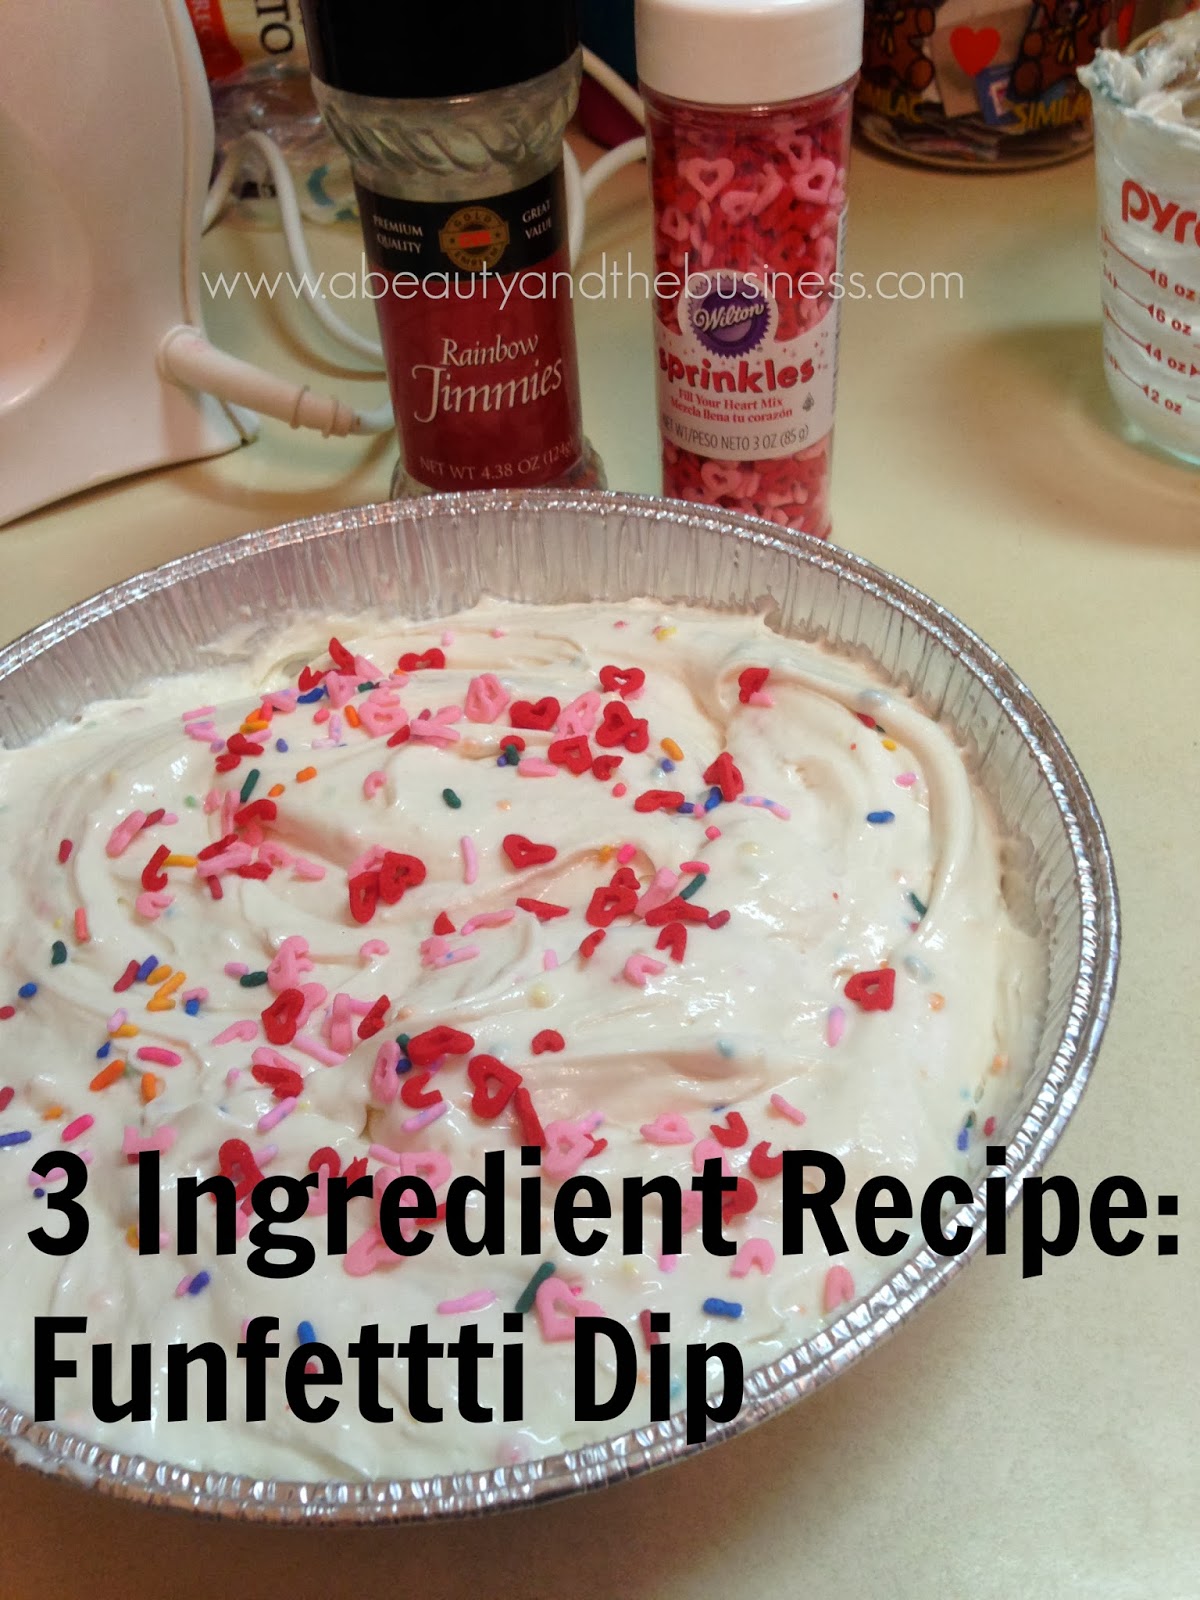 3 Ingredient Recipe: Skinny Funfetti Dip | A Beauty and The Business